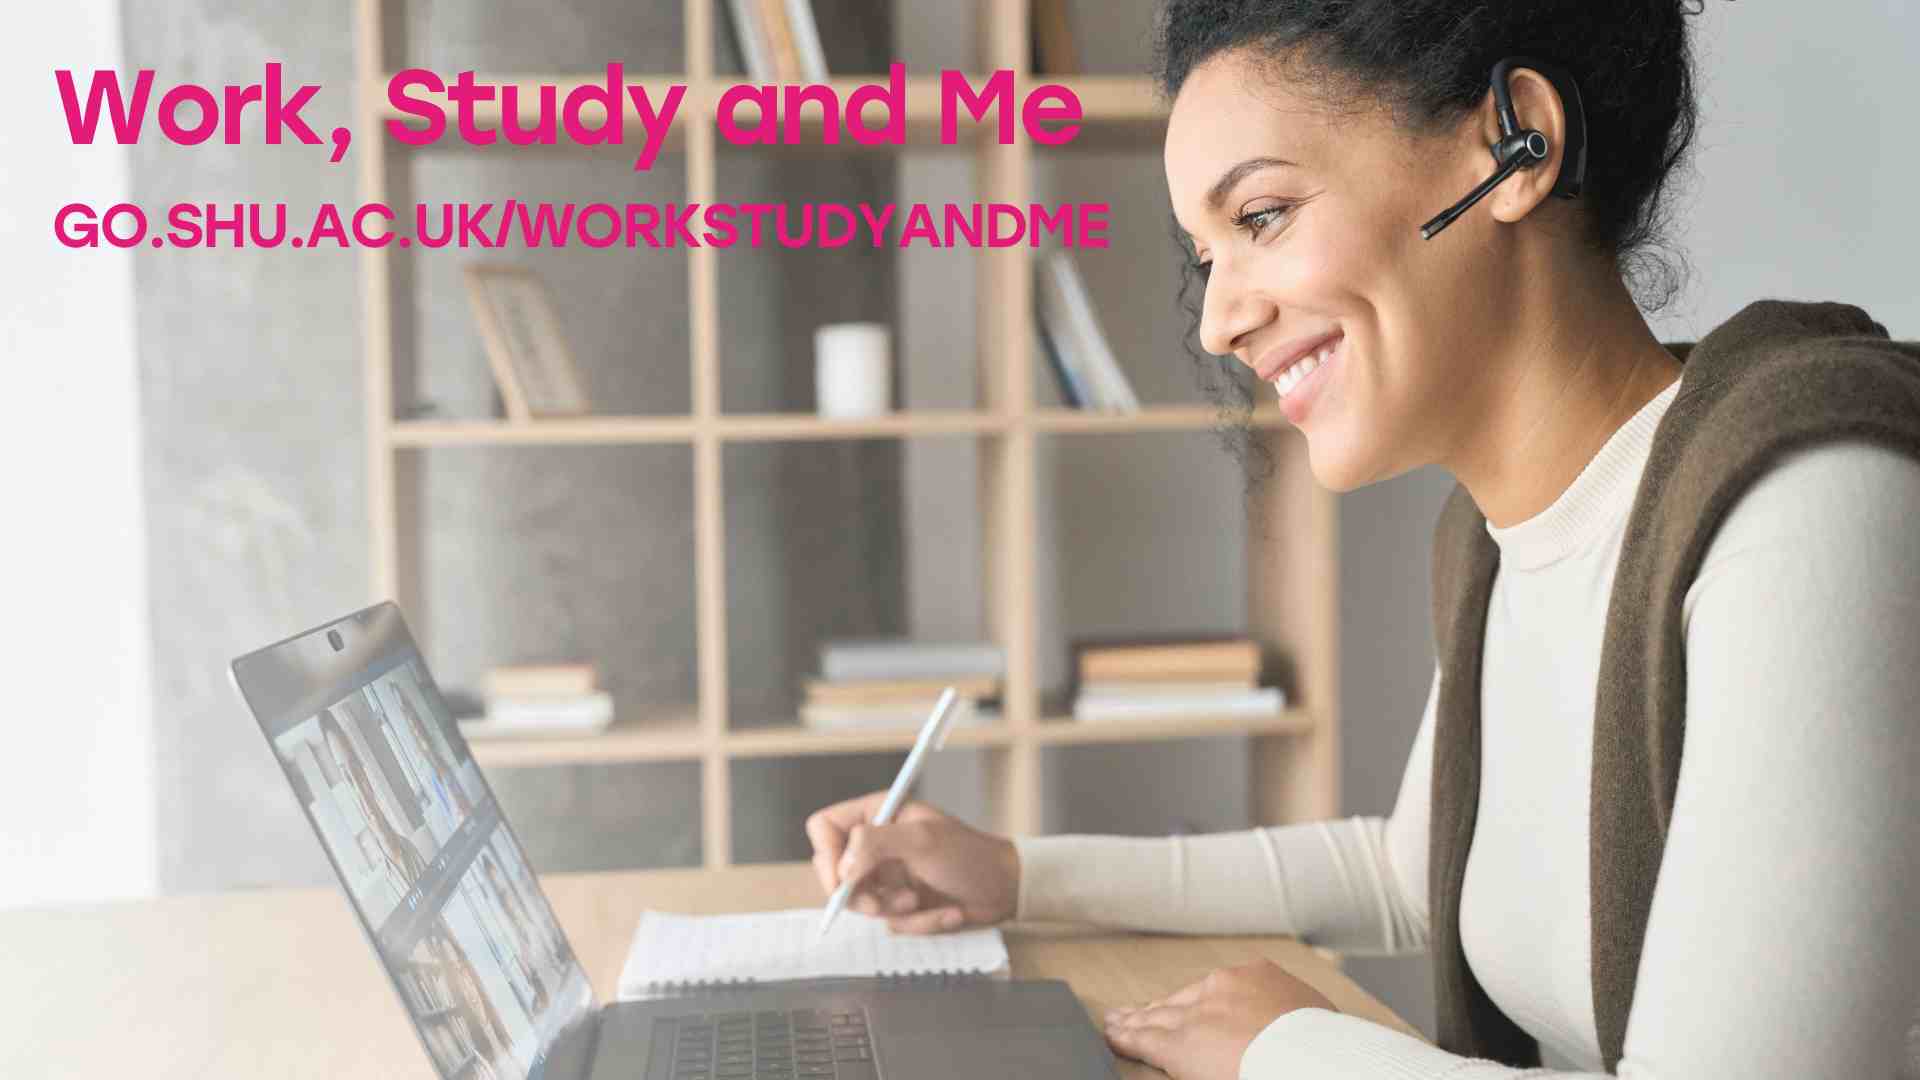 Image of someone in an online meeting with the text: Work, Study and Me and the link go.shu.ac.uk/workstudyandme